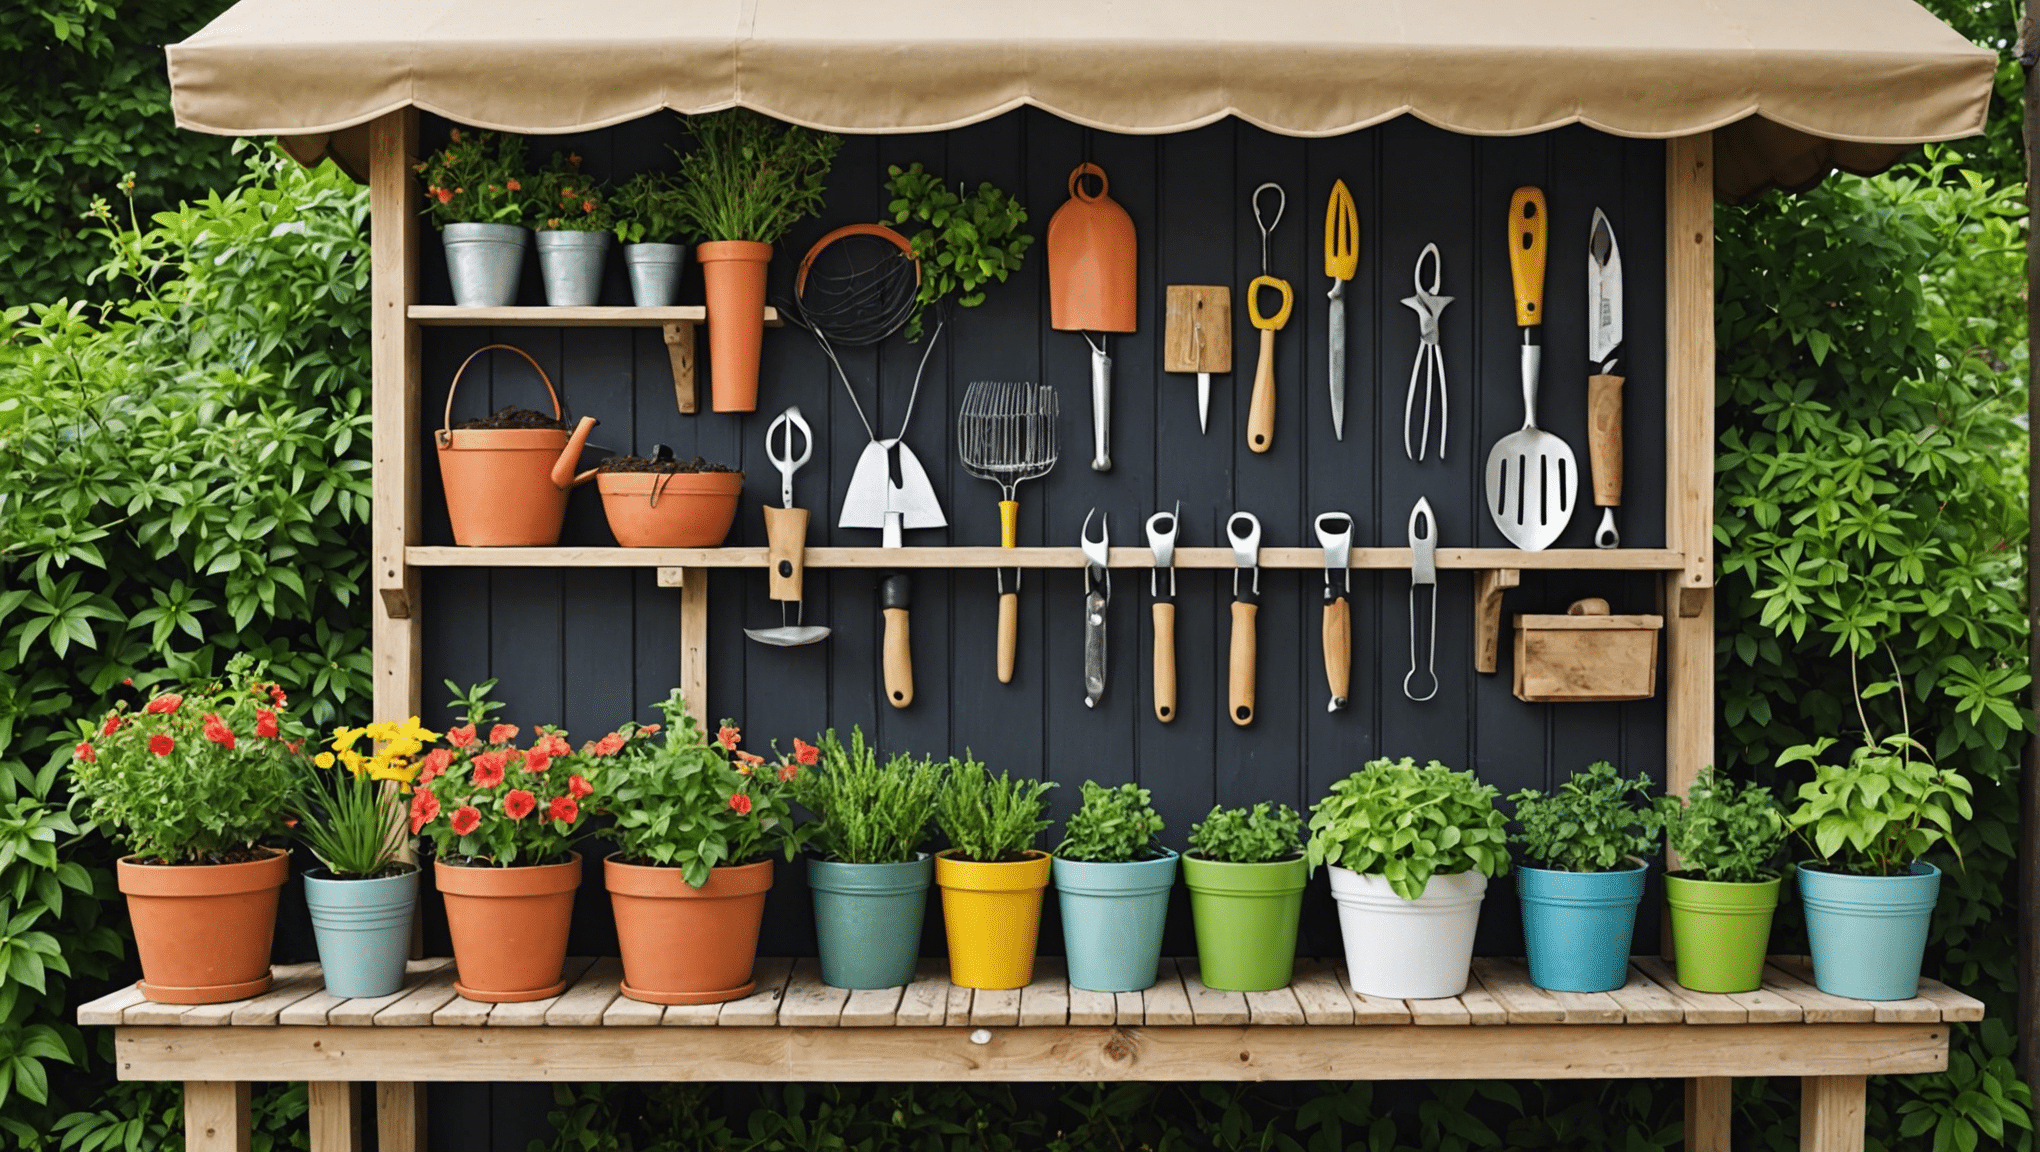 discover creative gardening tool storage ideas to keep your garden equipment organized and accessible with our helpful tips and solutions.